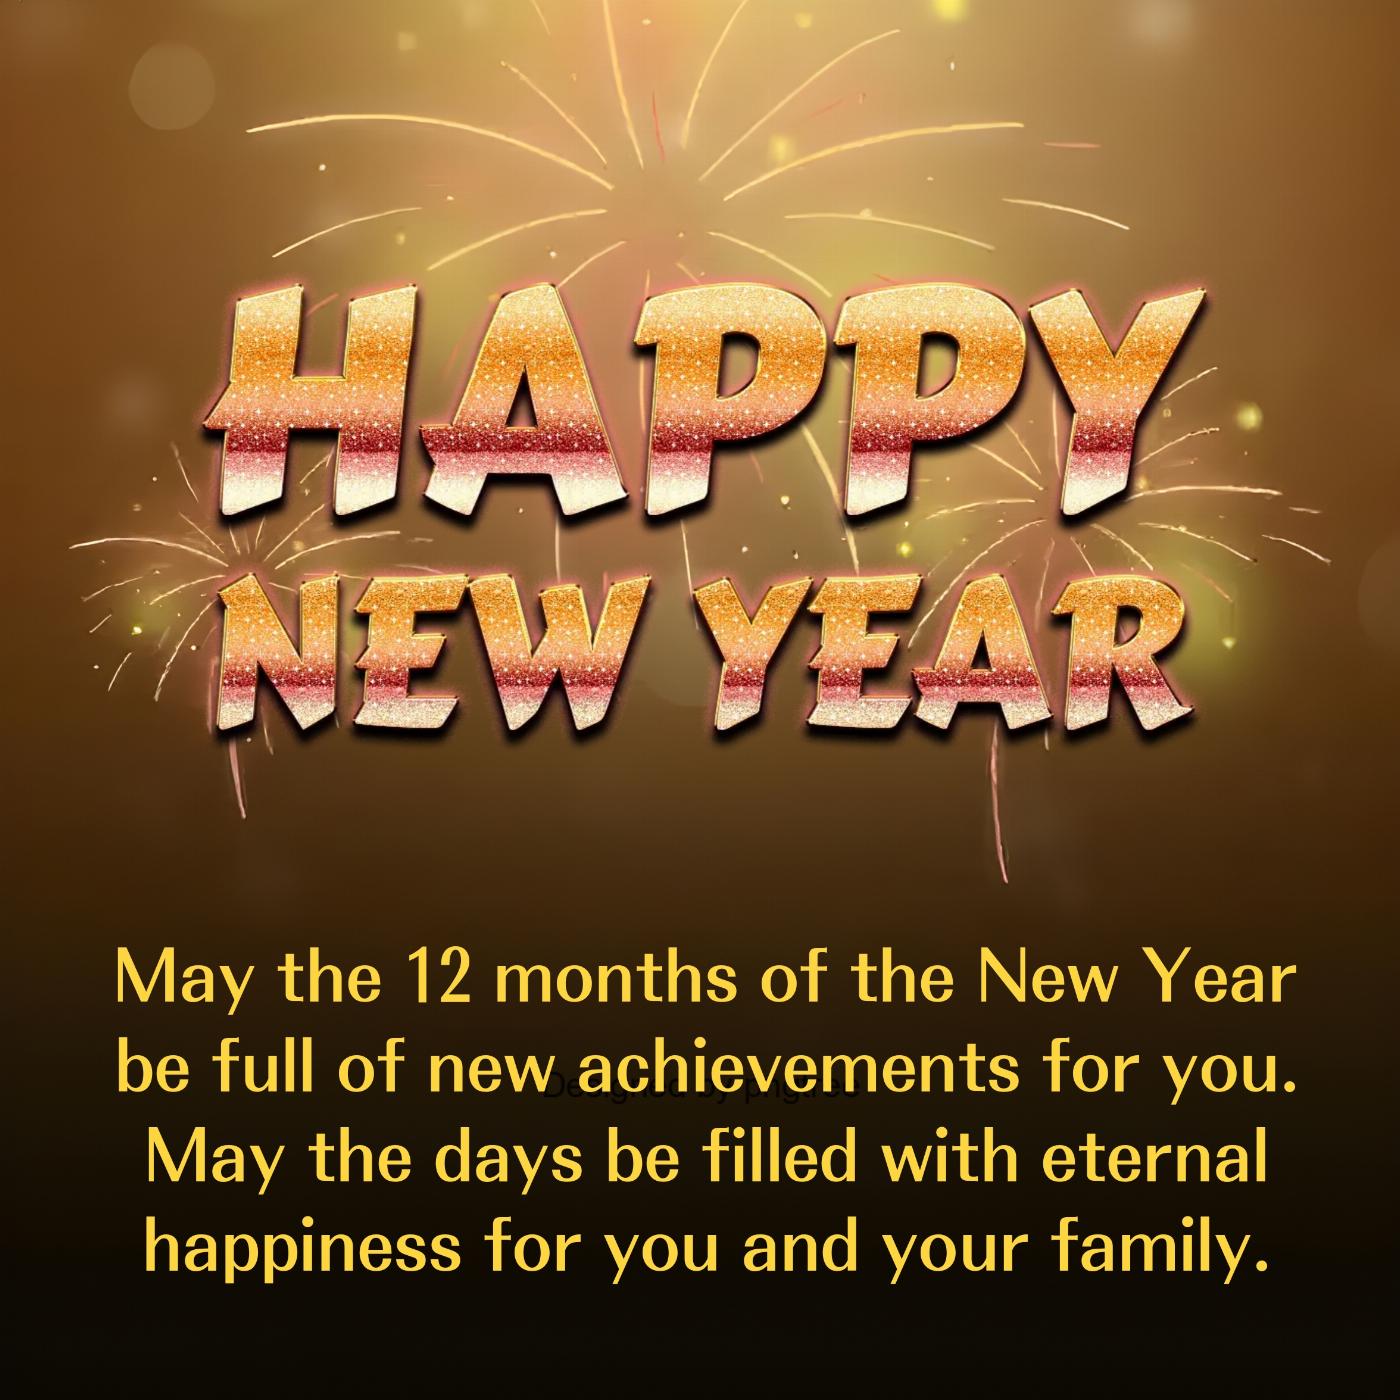 May the 12 months of the New Year be full of new achievements